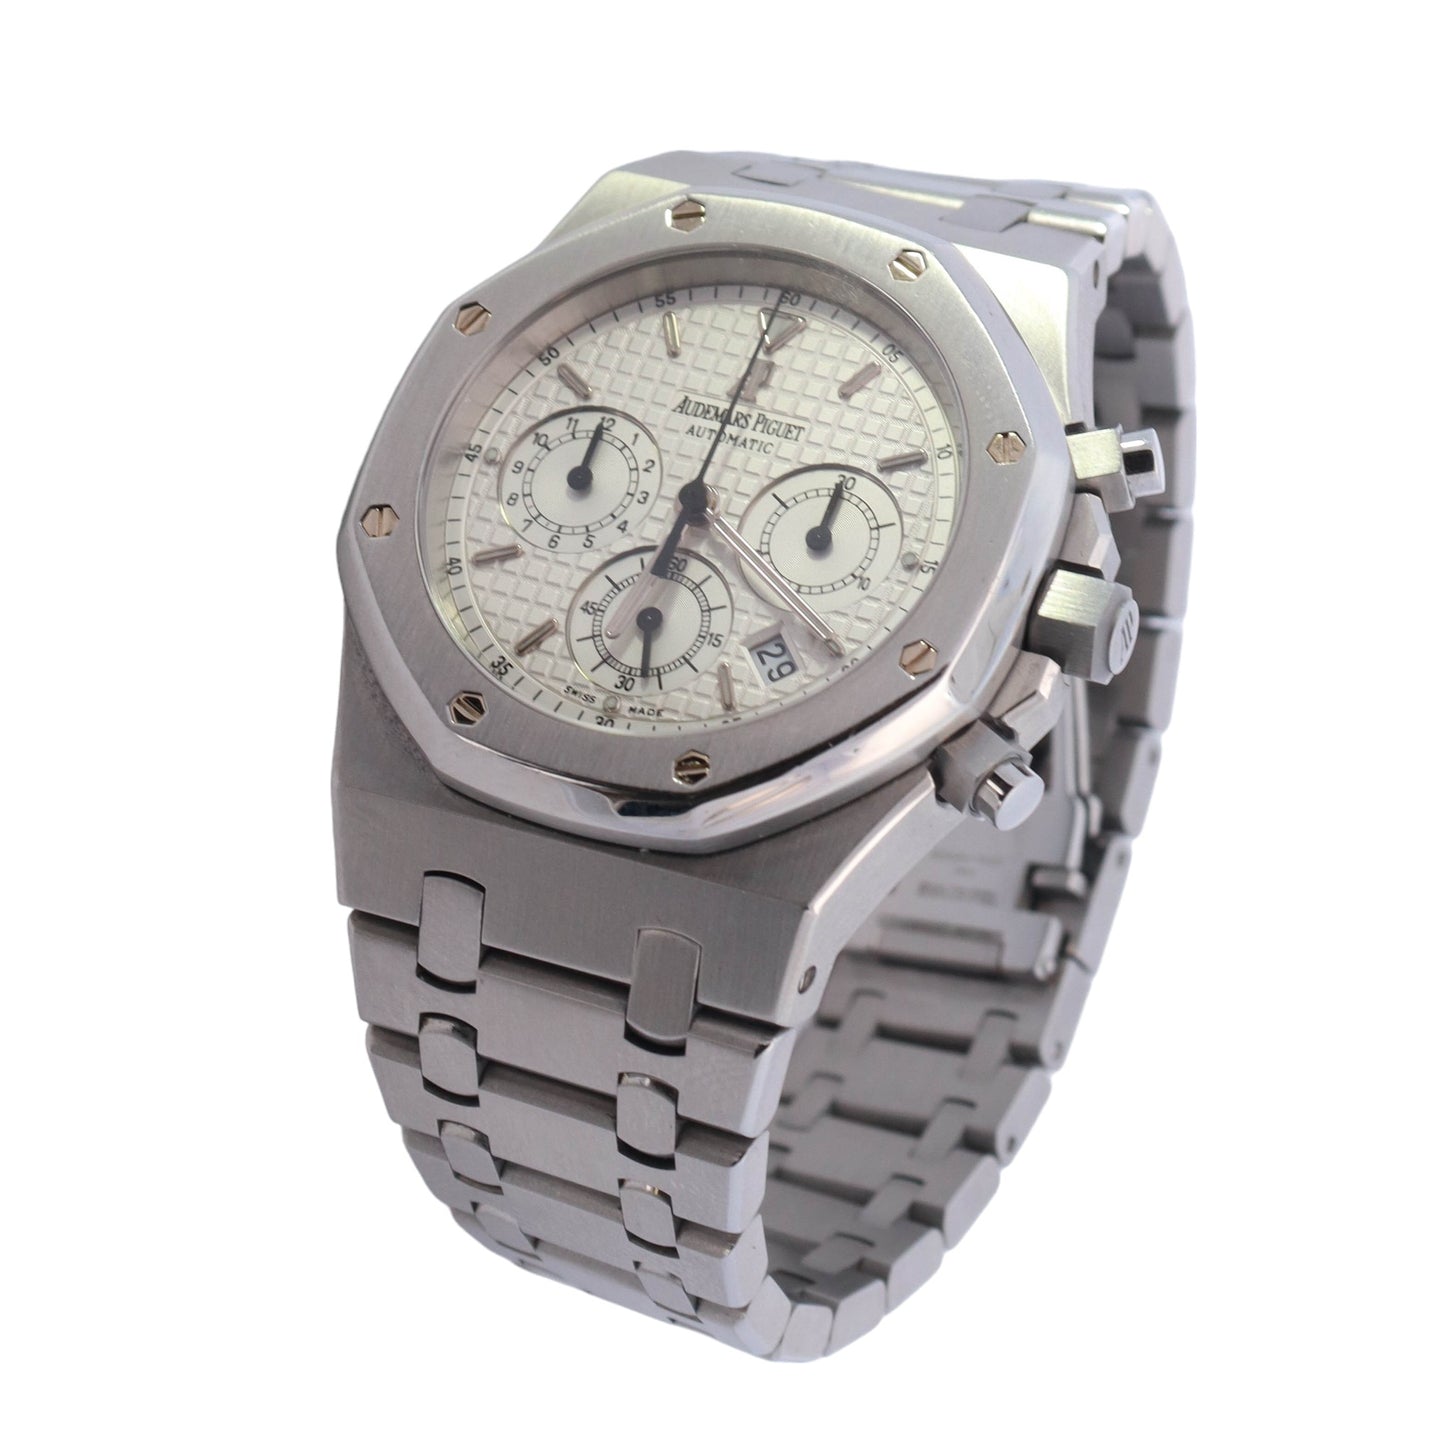 Audemars Piguet Royal Oak Chronograph Stainless Steel 39mm White Chronograph Stick Dial Watch Reference #: 25860ST.OO.1110ST.05